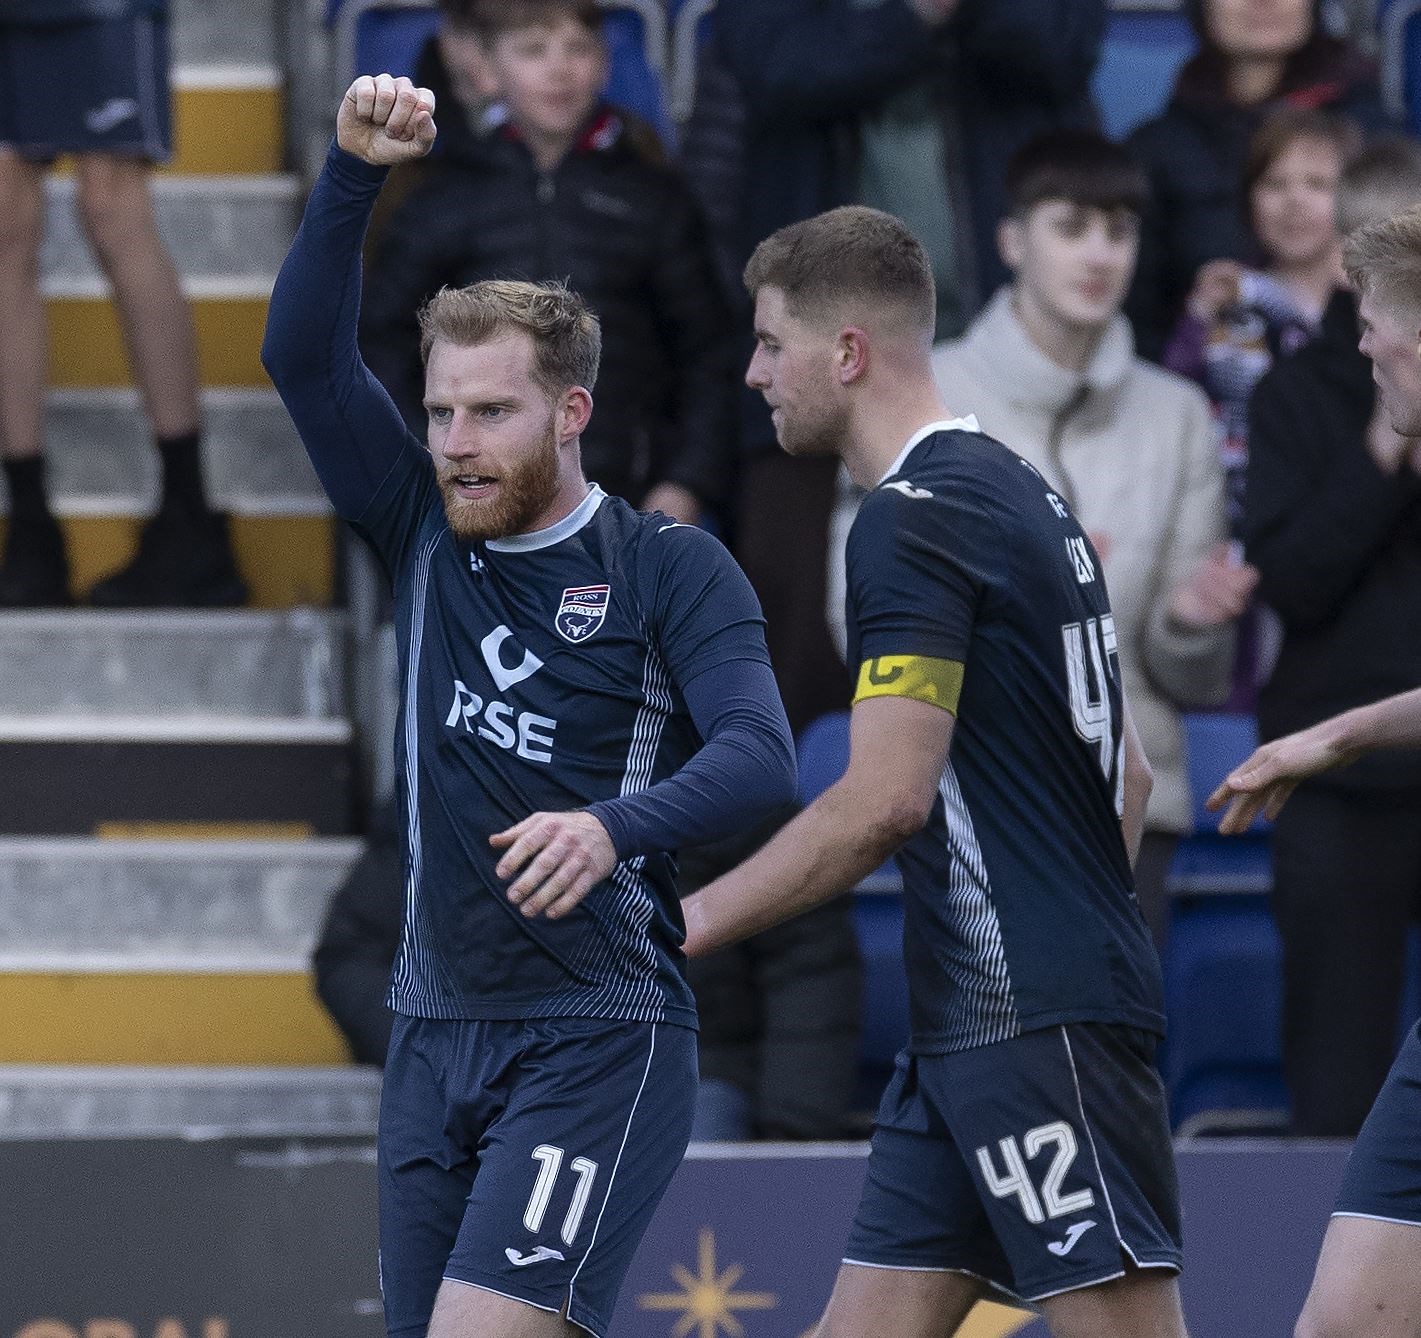 Picture - Ken Macpherson. Ross County(3) v Livingston(2). 24/02/24. Ross County's Josh Sims celebrates after scoring the late winning g goal.